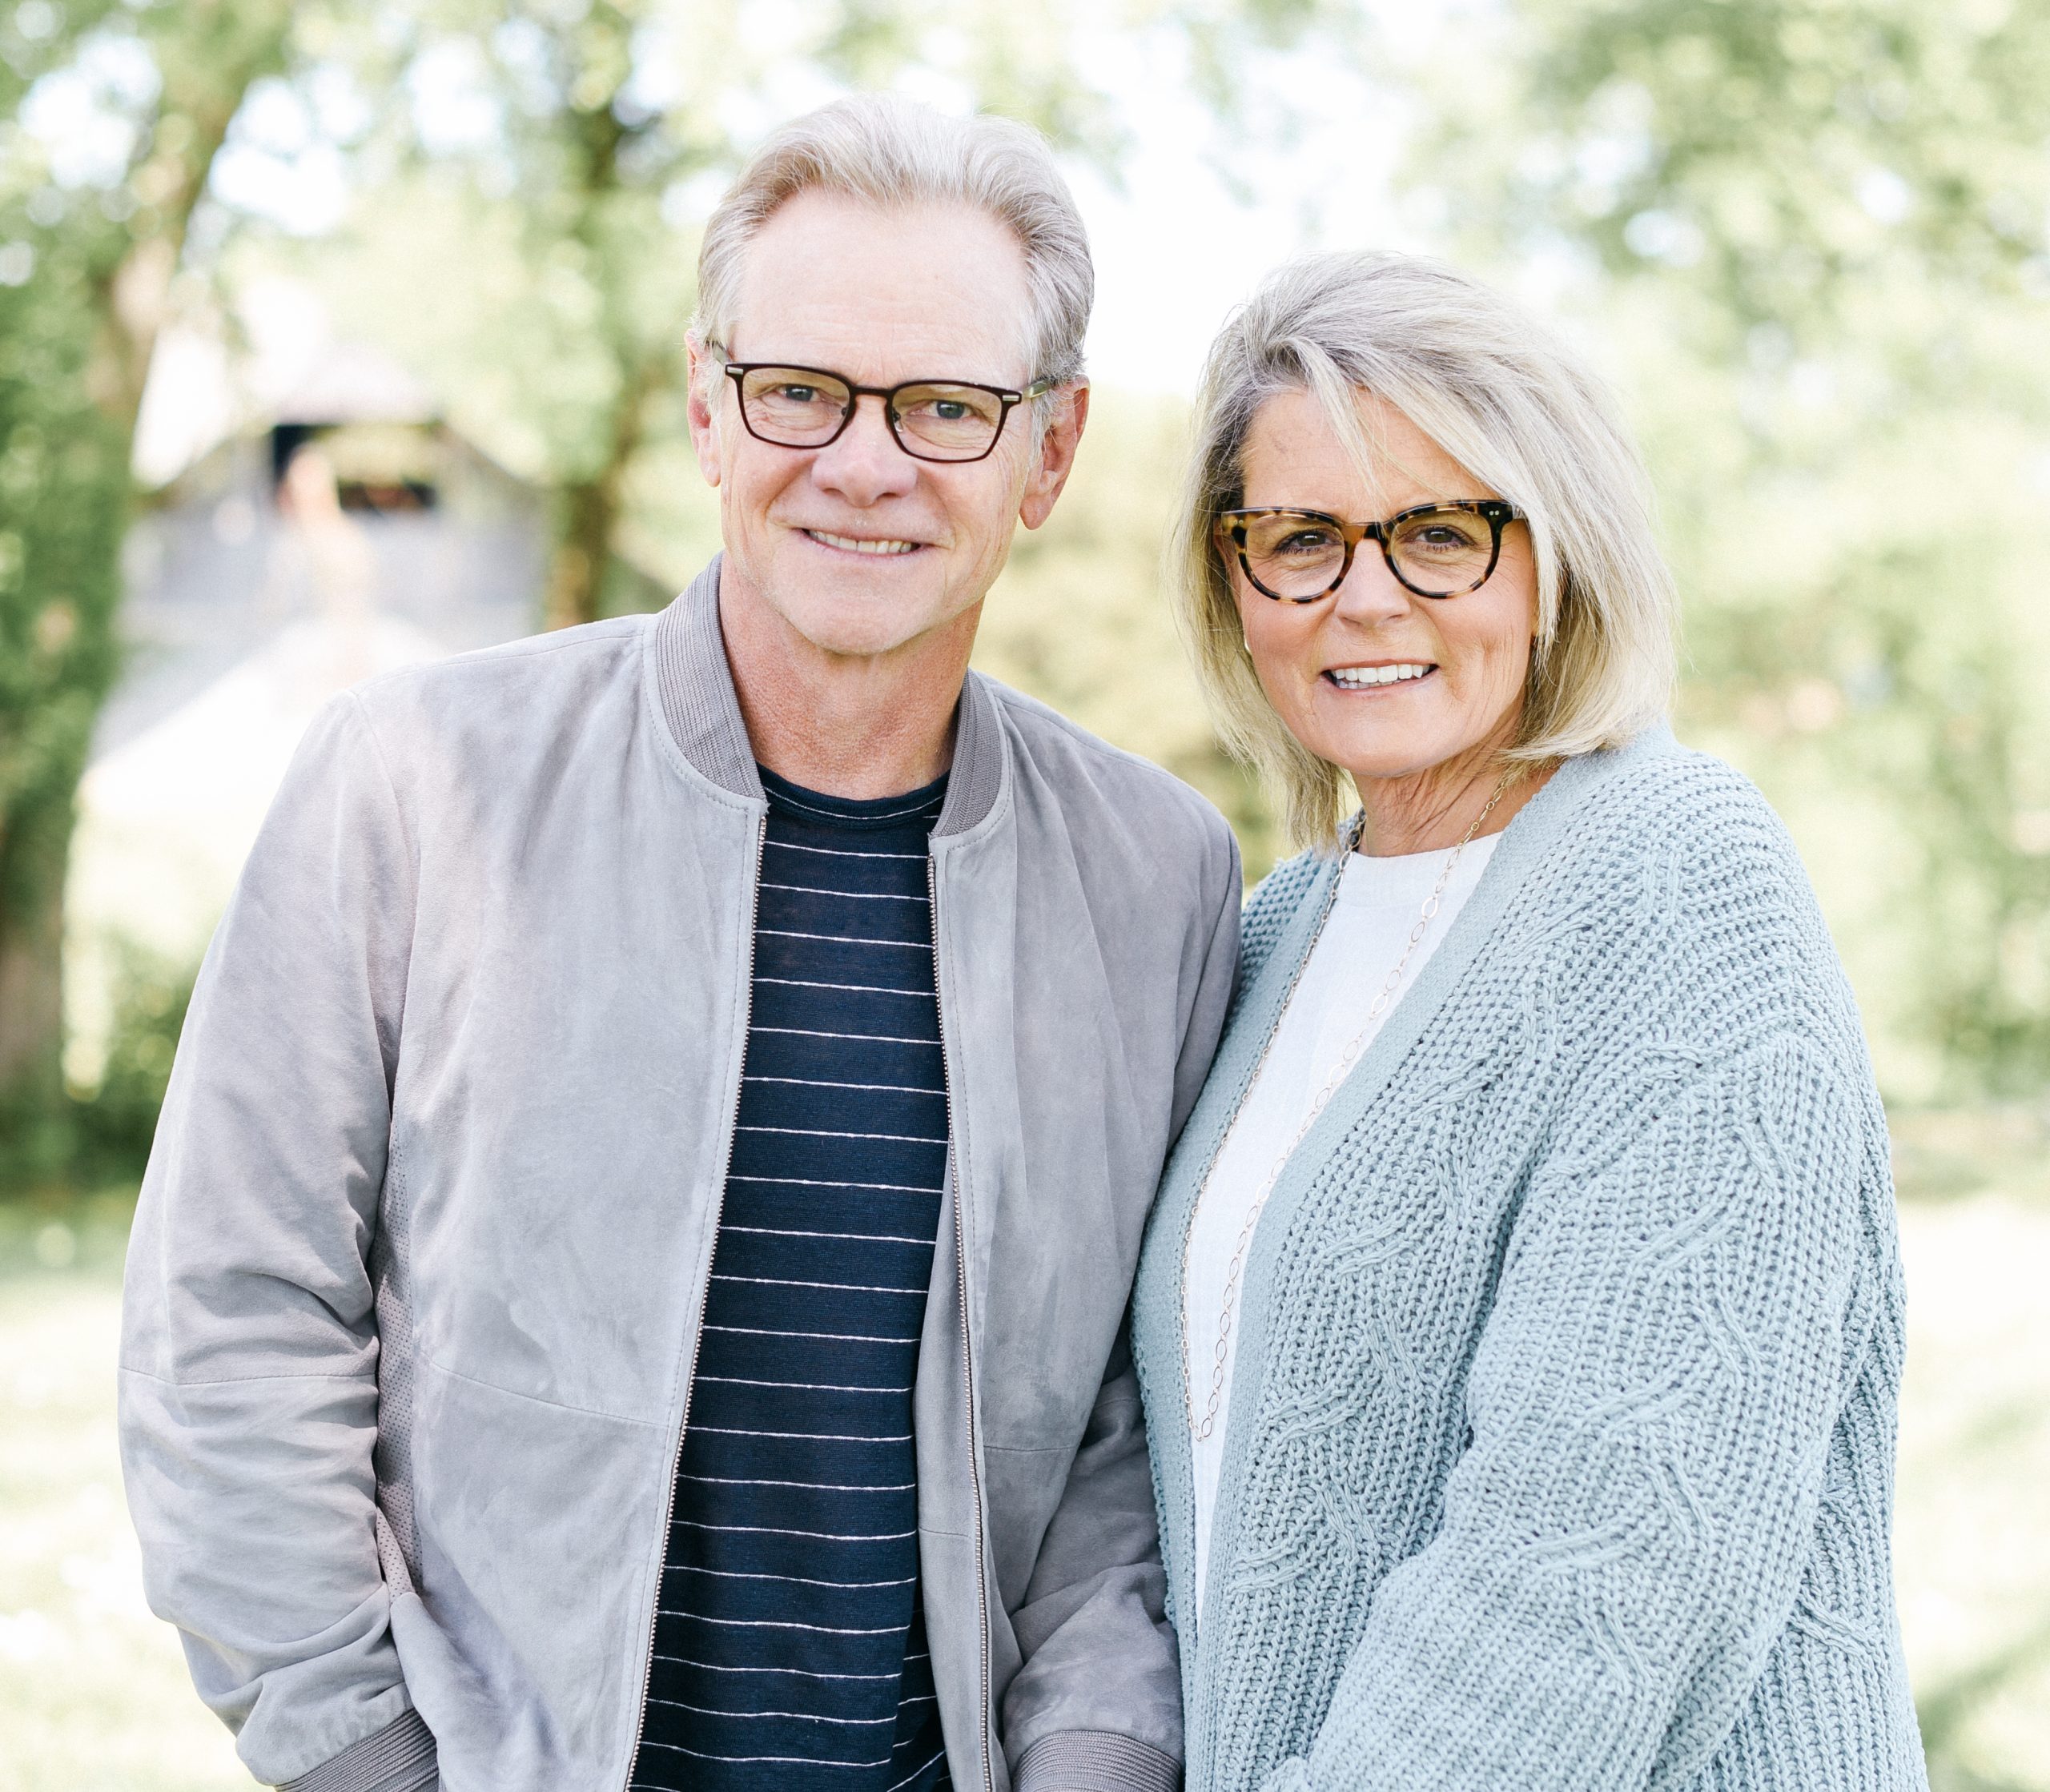 Mary Beth and Steven Curtis Chapman